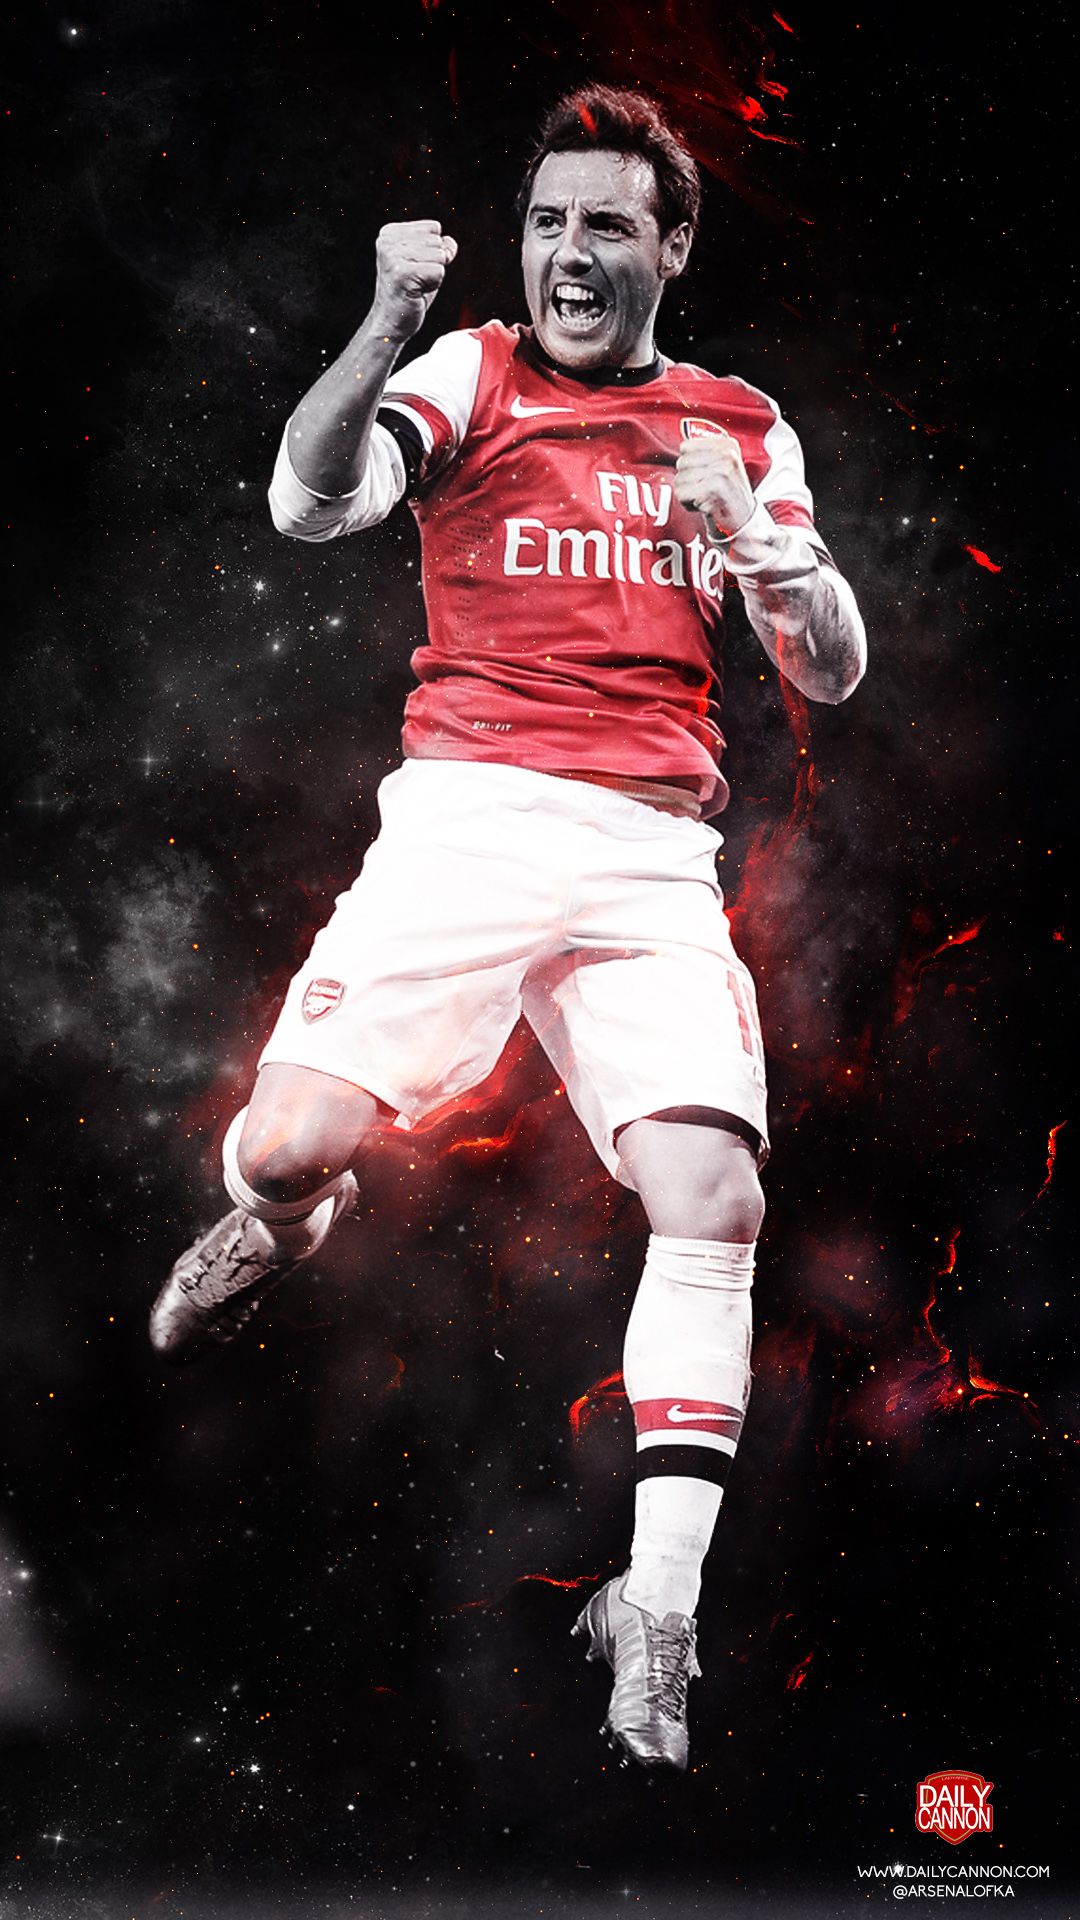 Arsenal mobile wallpaper featuring players worthy of wearing the shirt